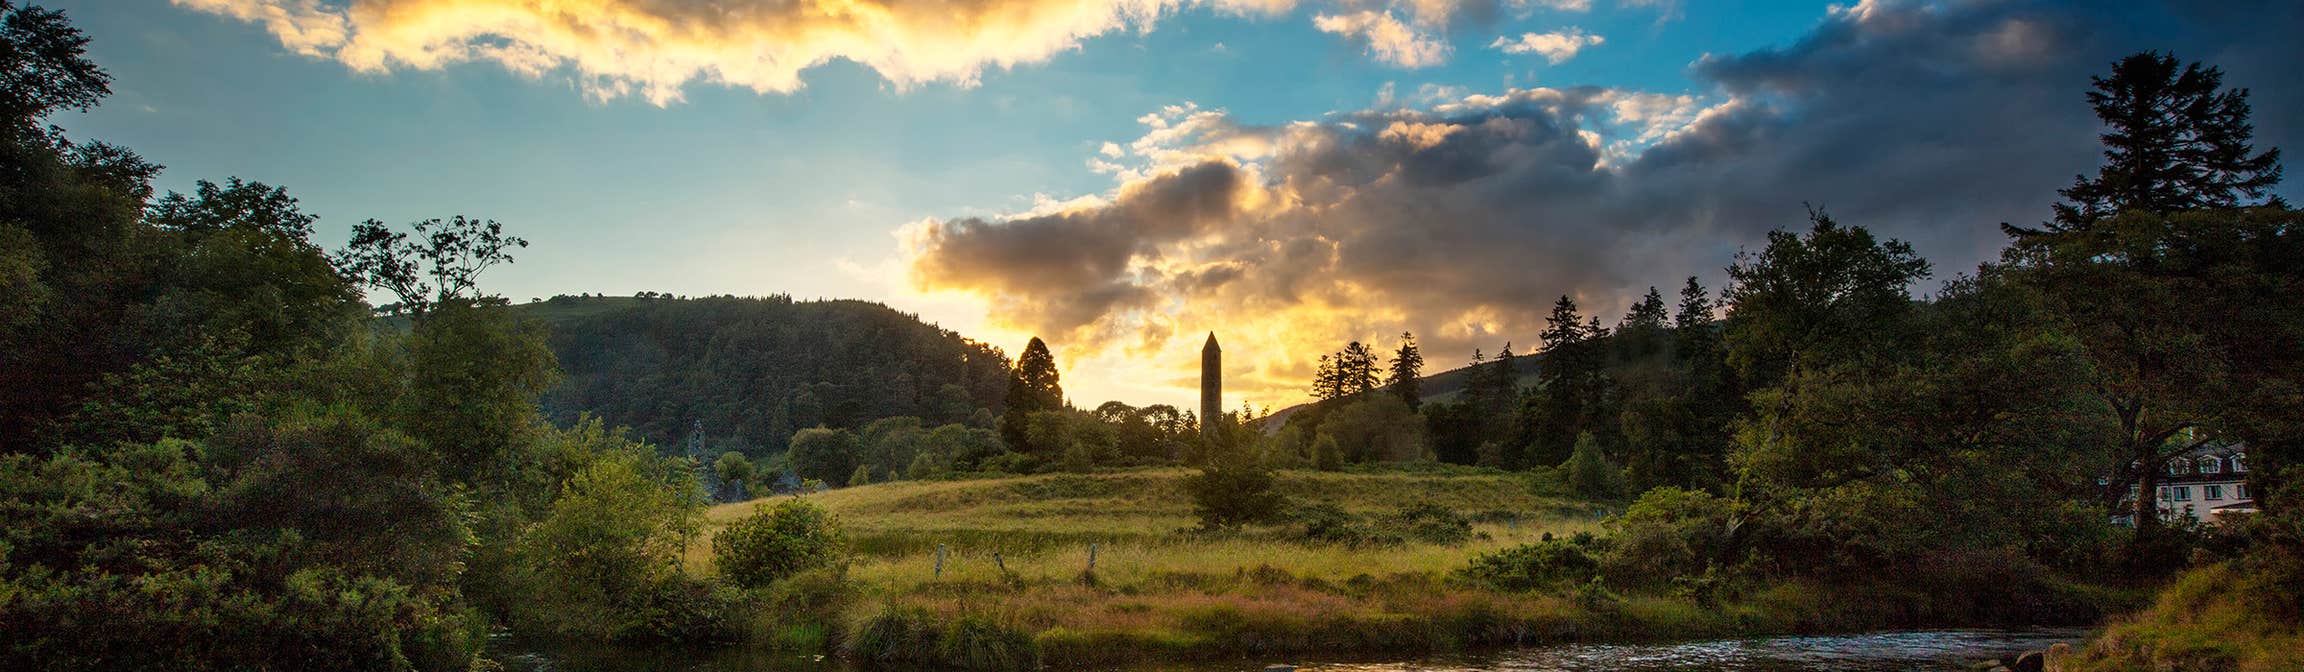 A sunset at Glendalough, County Wicklow